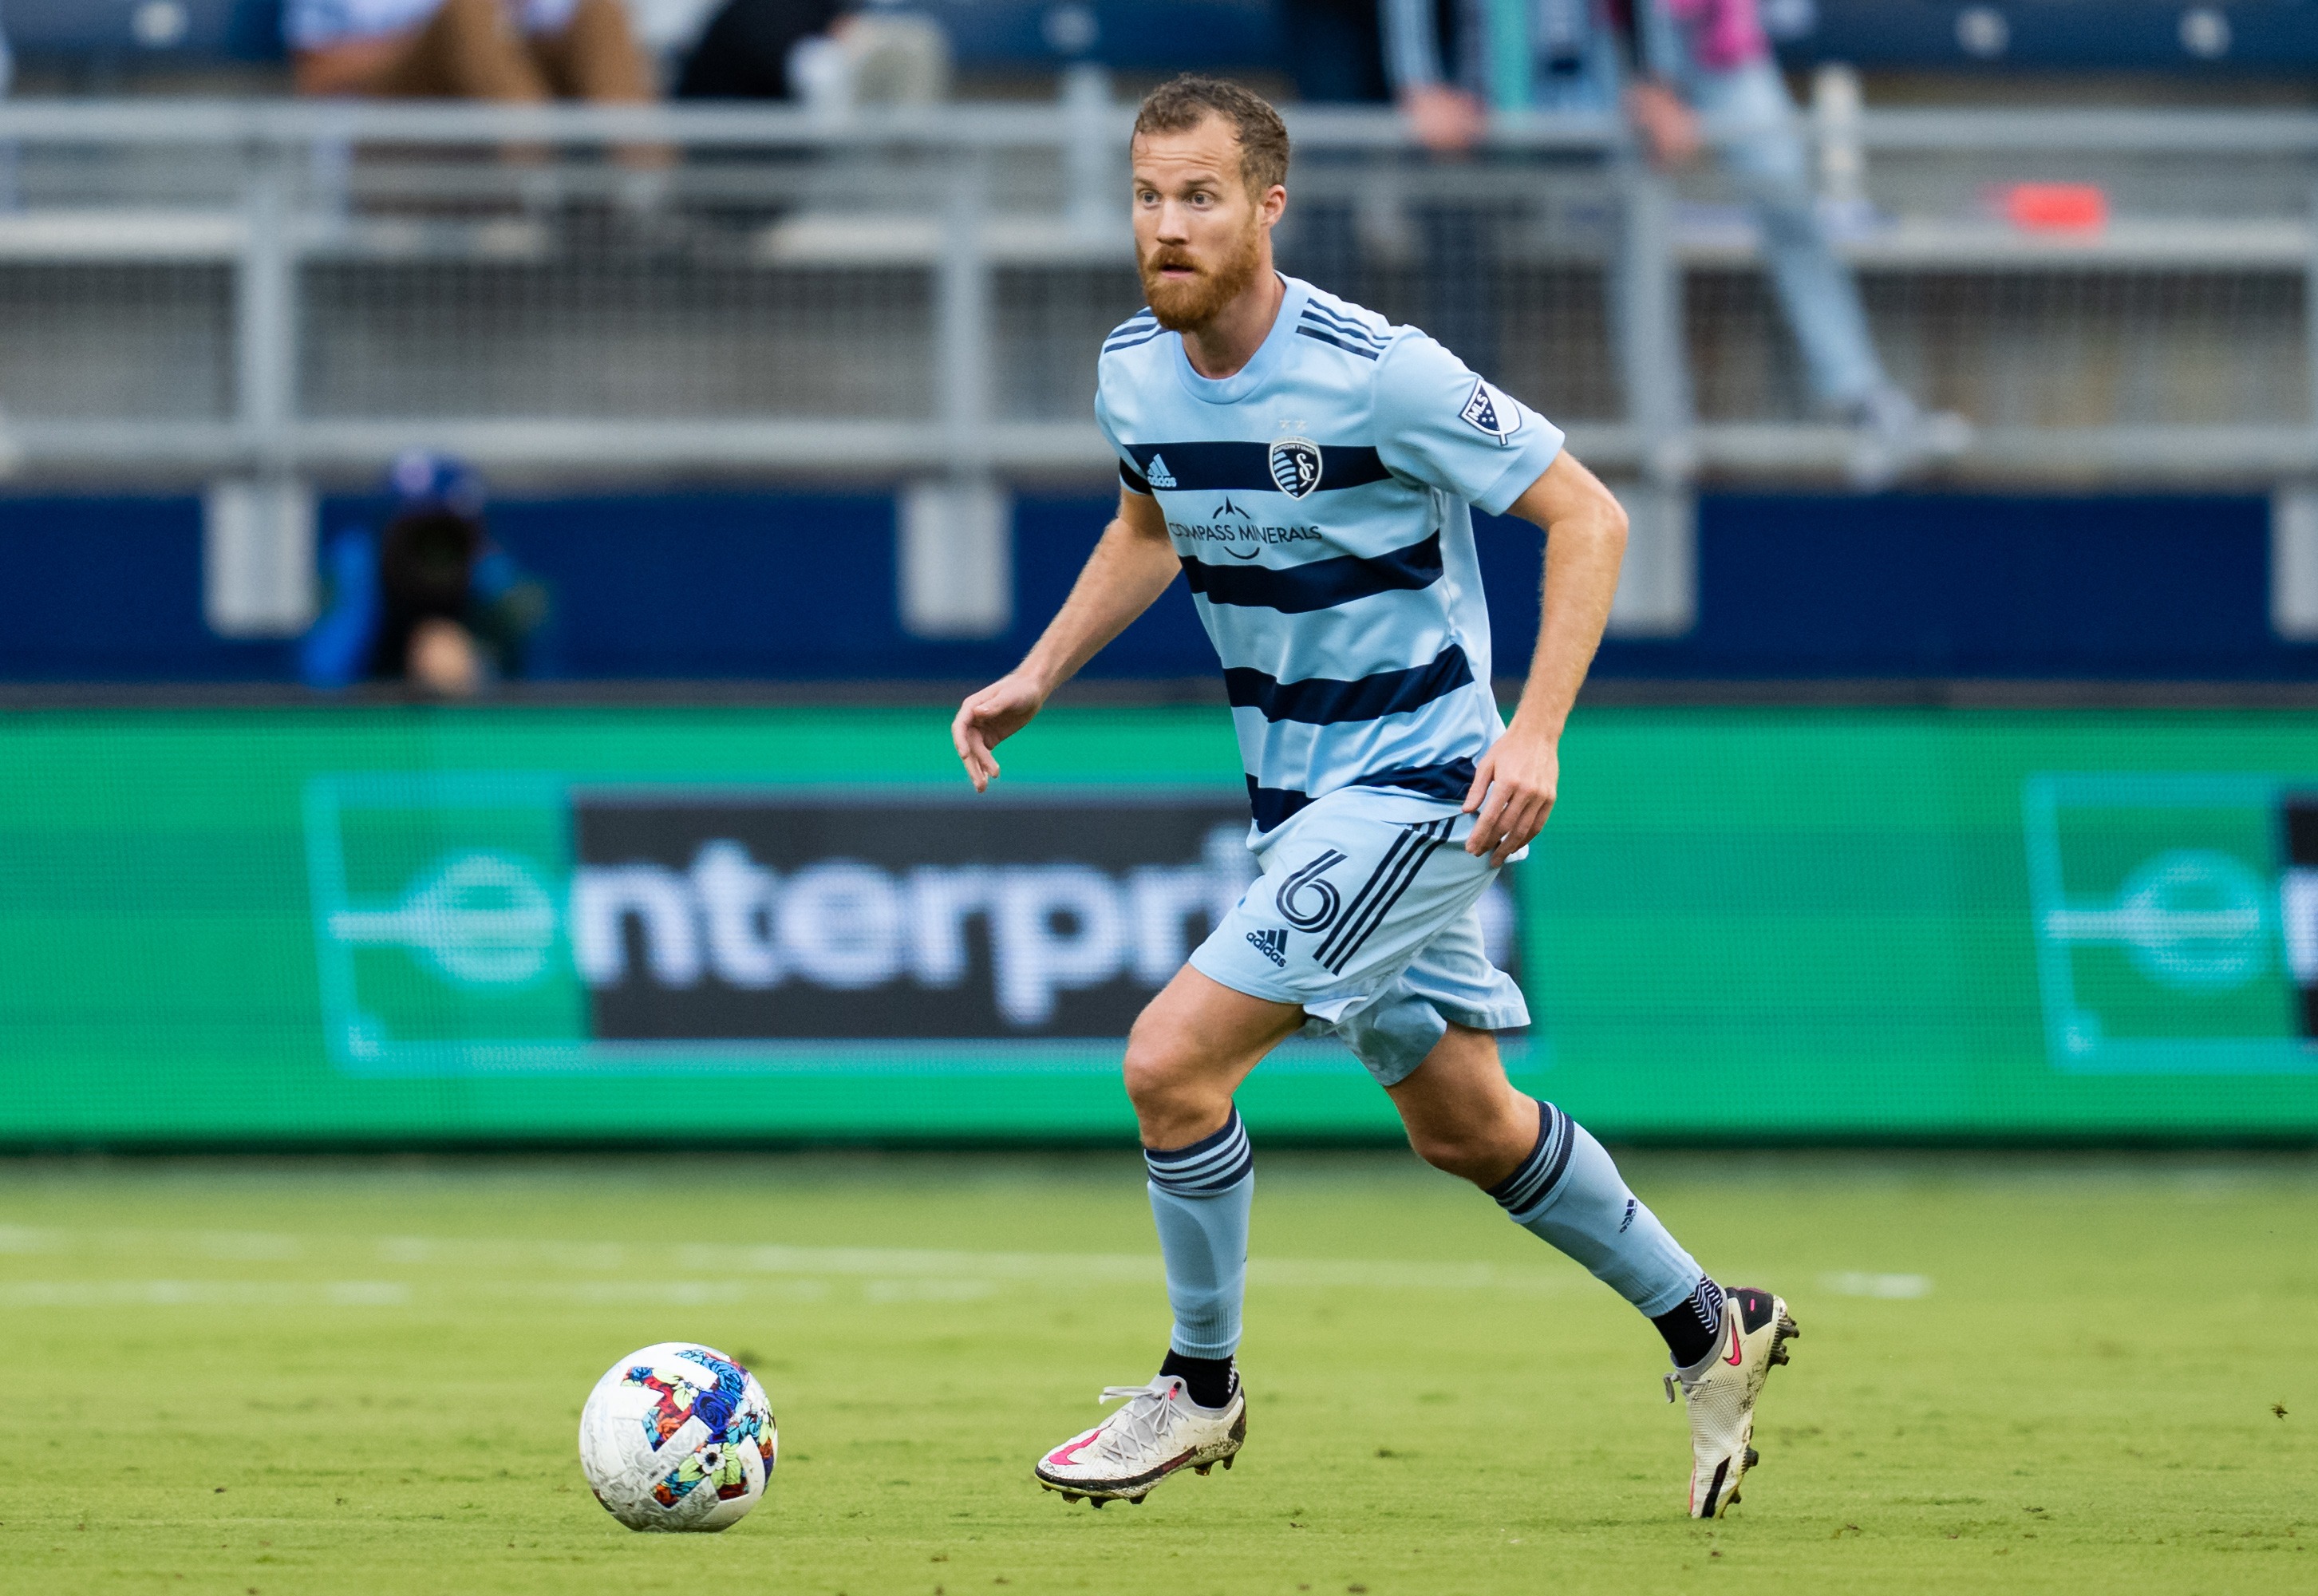 Sporting KC midfielder Uri Rosell elected to MLSPA Executive Board